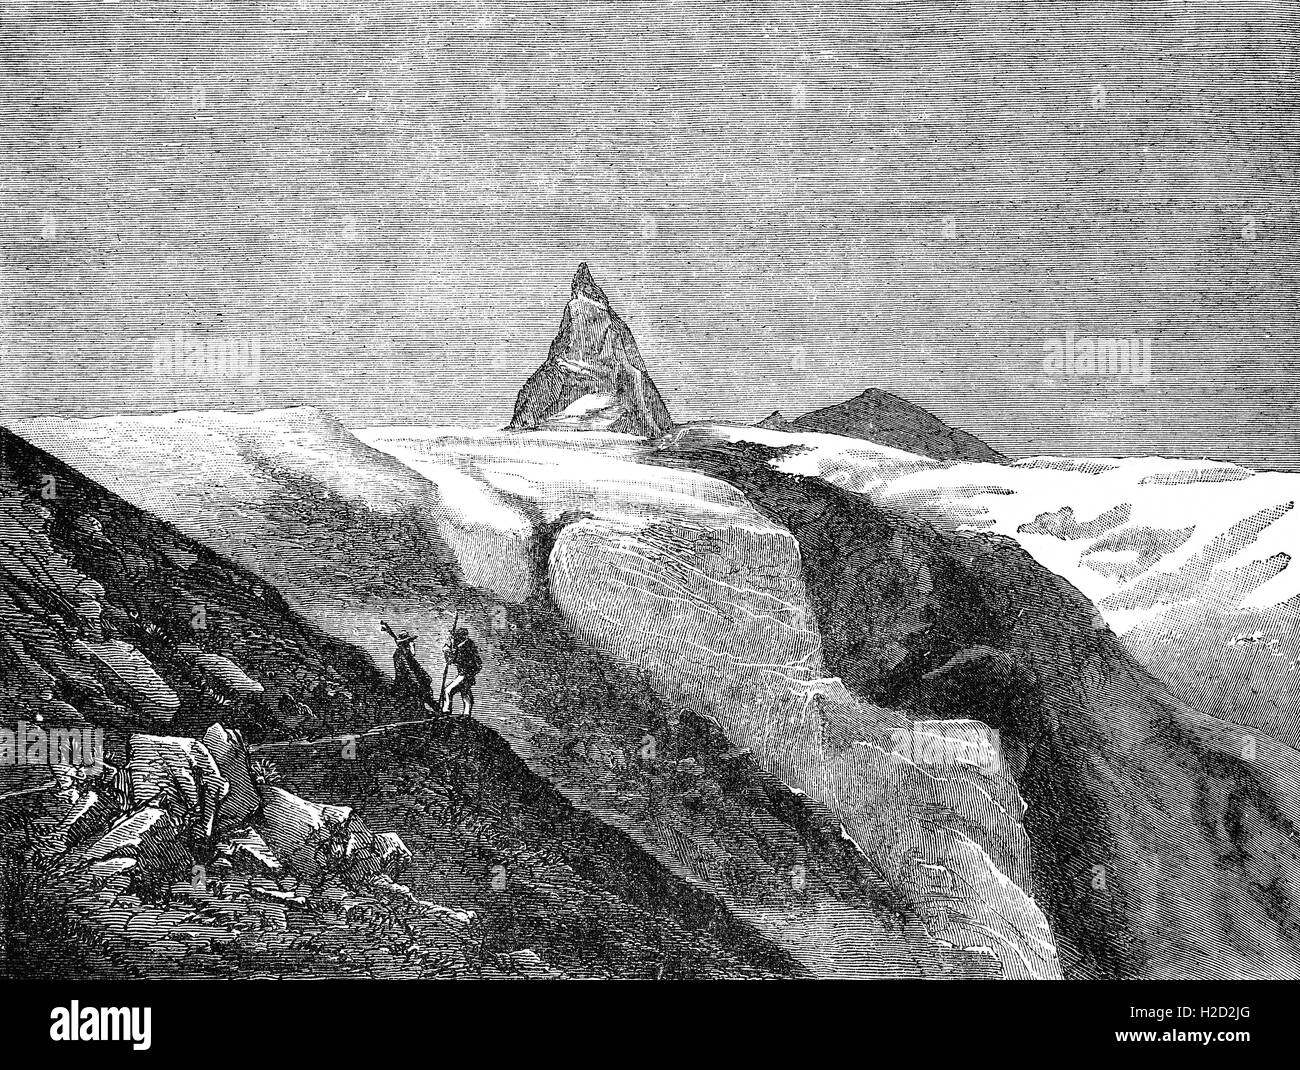 19th Century sketch of mountain guides viewing the  Matterhorn,  a mountain of the Alps, straddling the main watershed and border between Switzerland and Italy. It is a huge and near-symmetrical pyramidal peak in the extended Monte Rosa area of the Pennine Alps, whose summit is 4,478 metres (14,692 ft) high, making it one of the highest summits in the Alps and Europe. Stock Photo